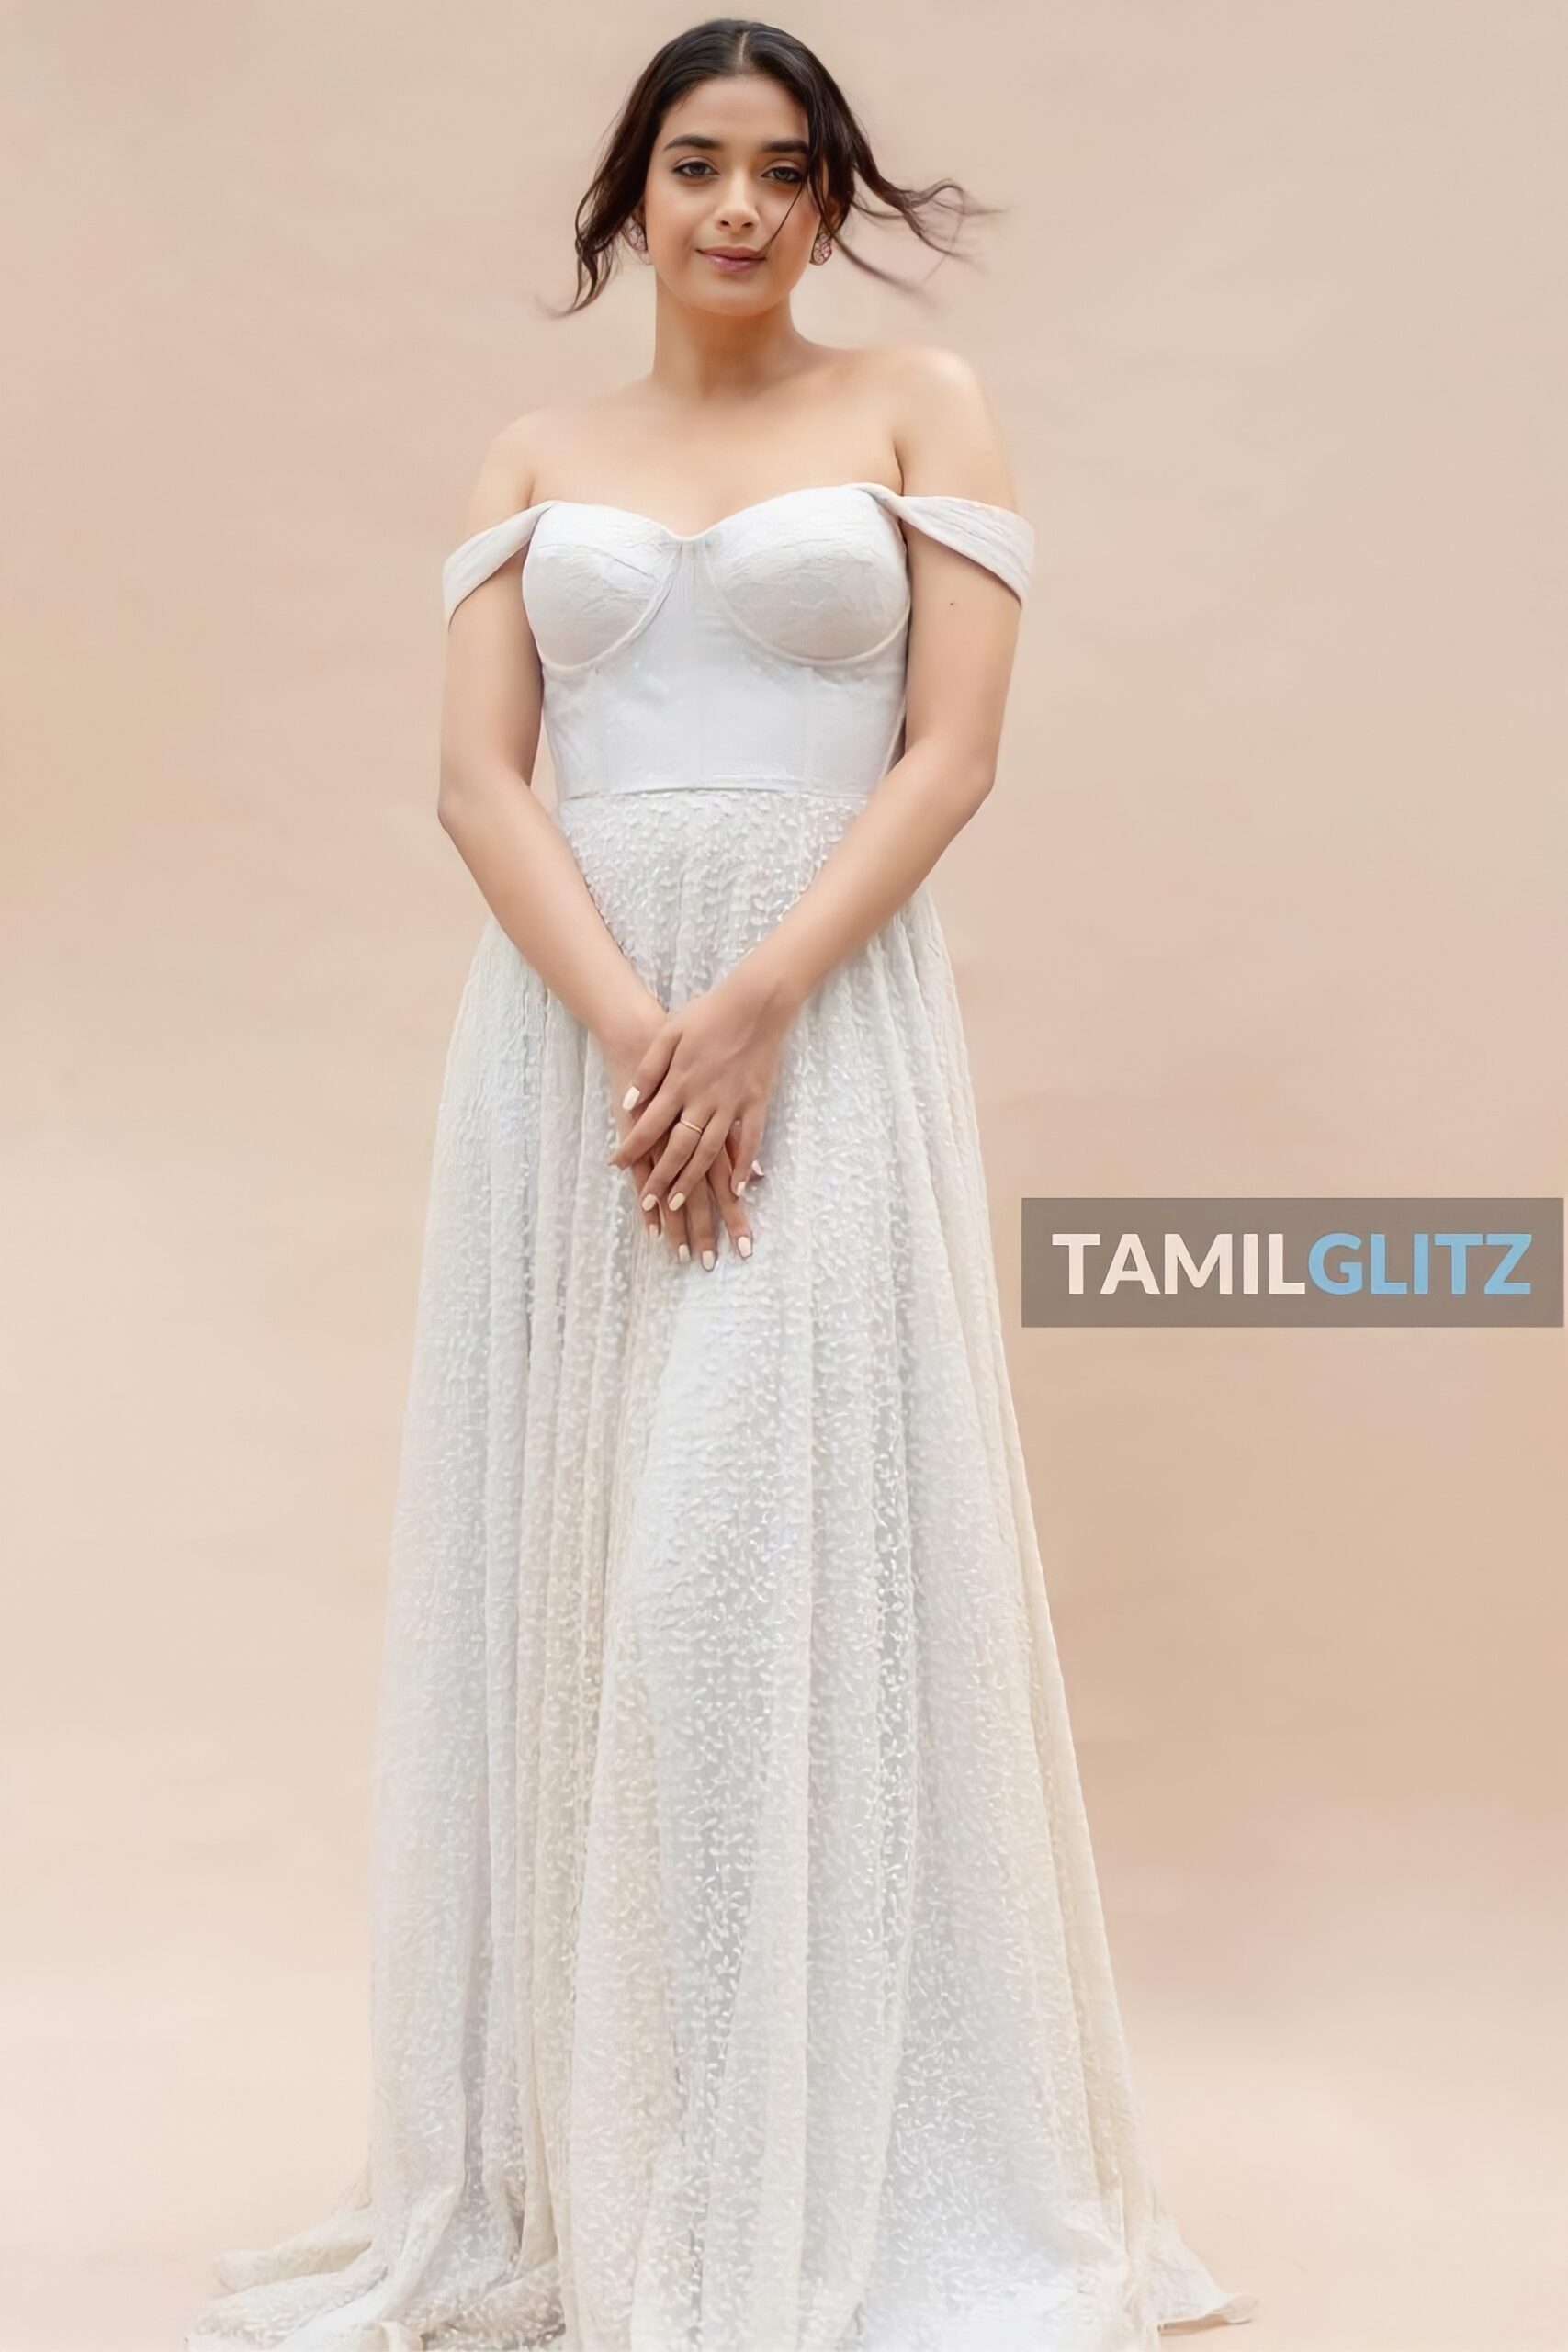 Keerthi Suresh Photos in a Beautiful White Gown